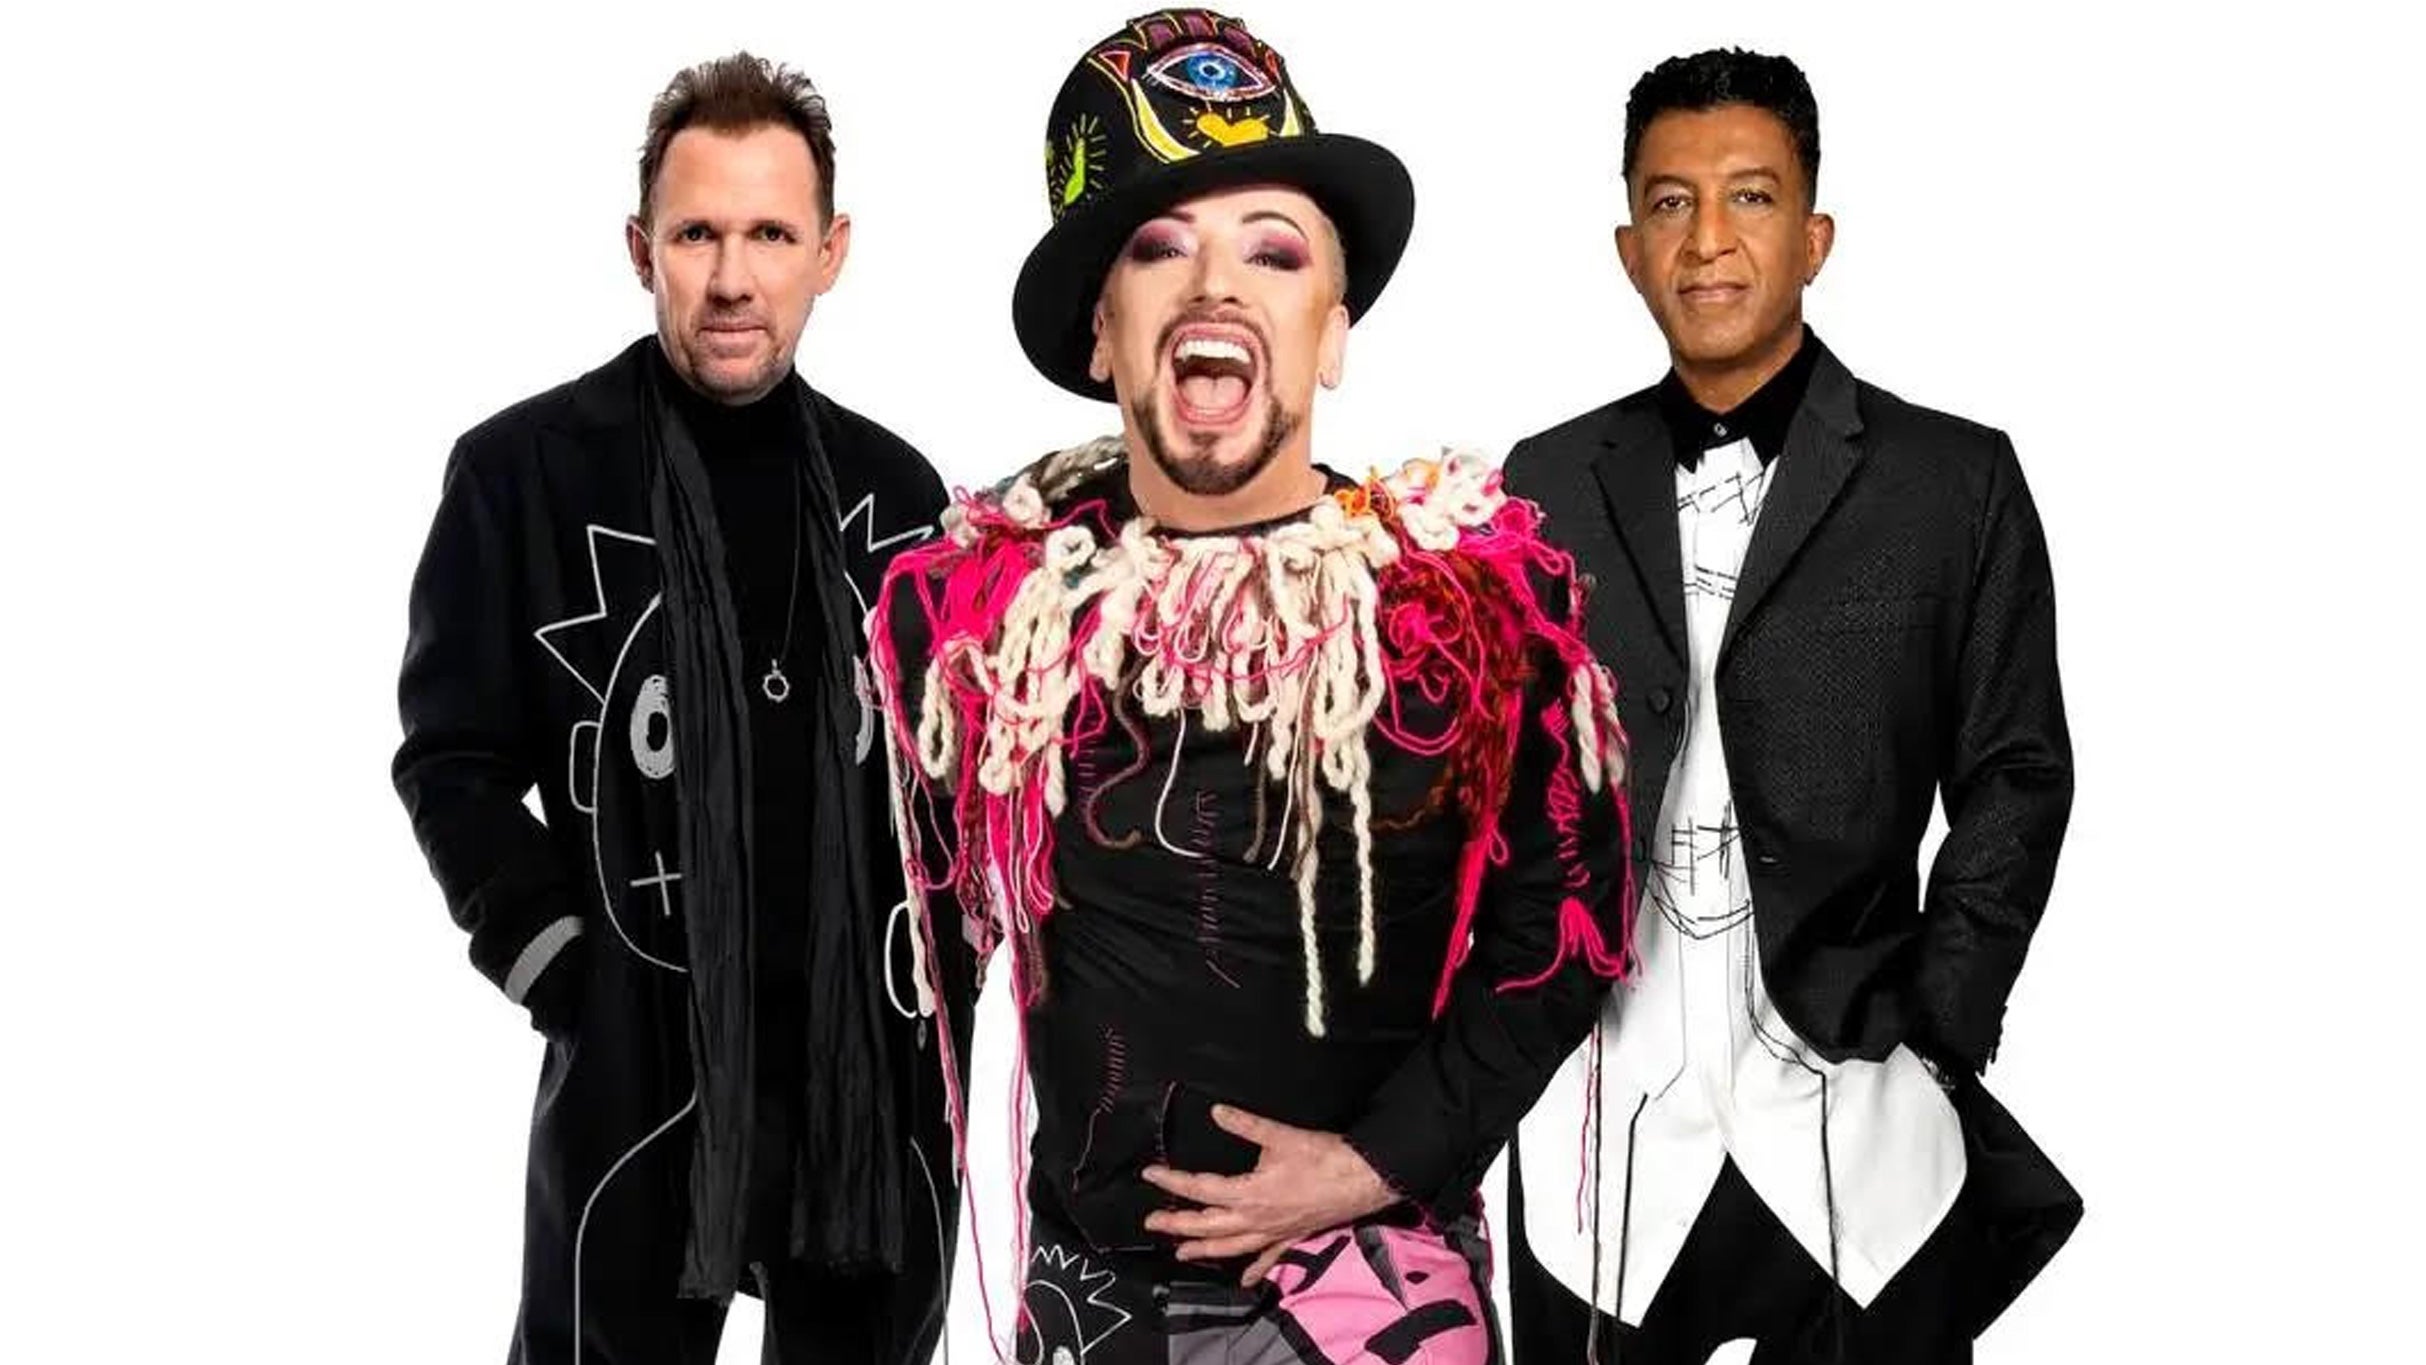 Boy George & Culture Club: The Letting It Go Show in Woodlands promo photo for Aisle Seating presale offer code